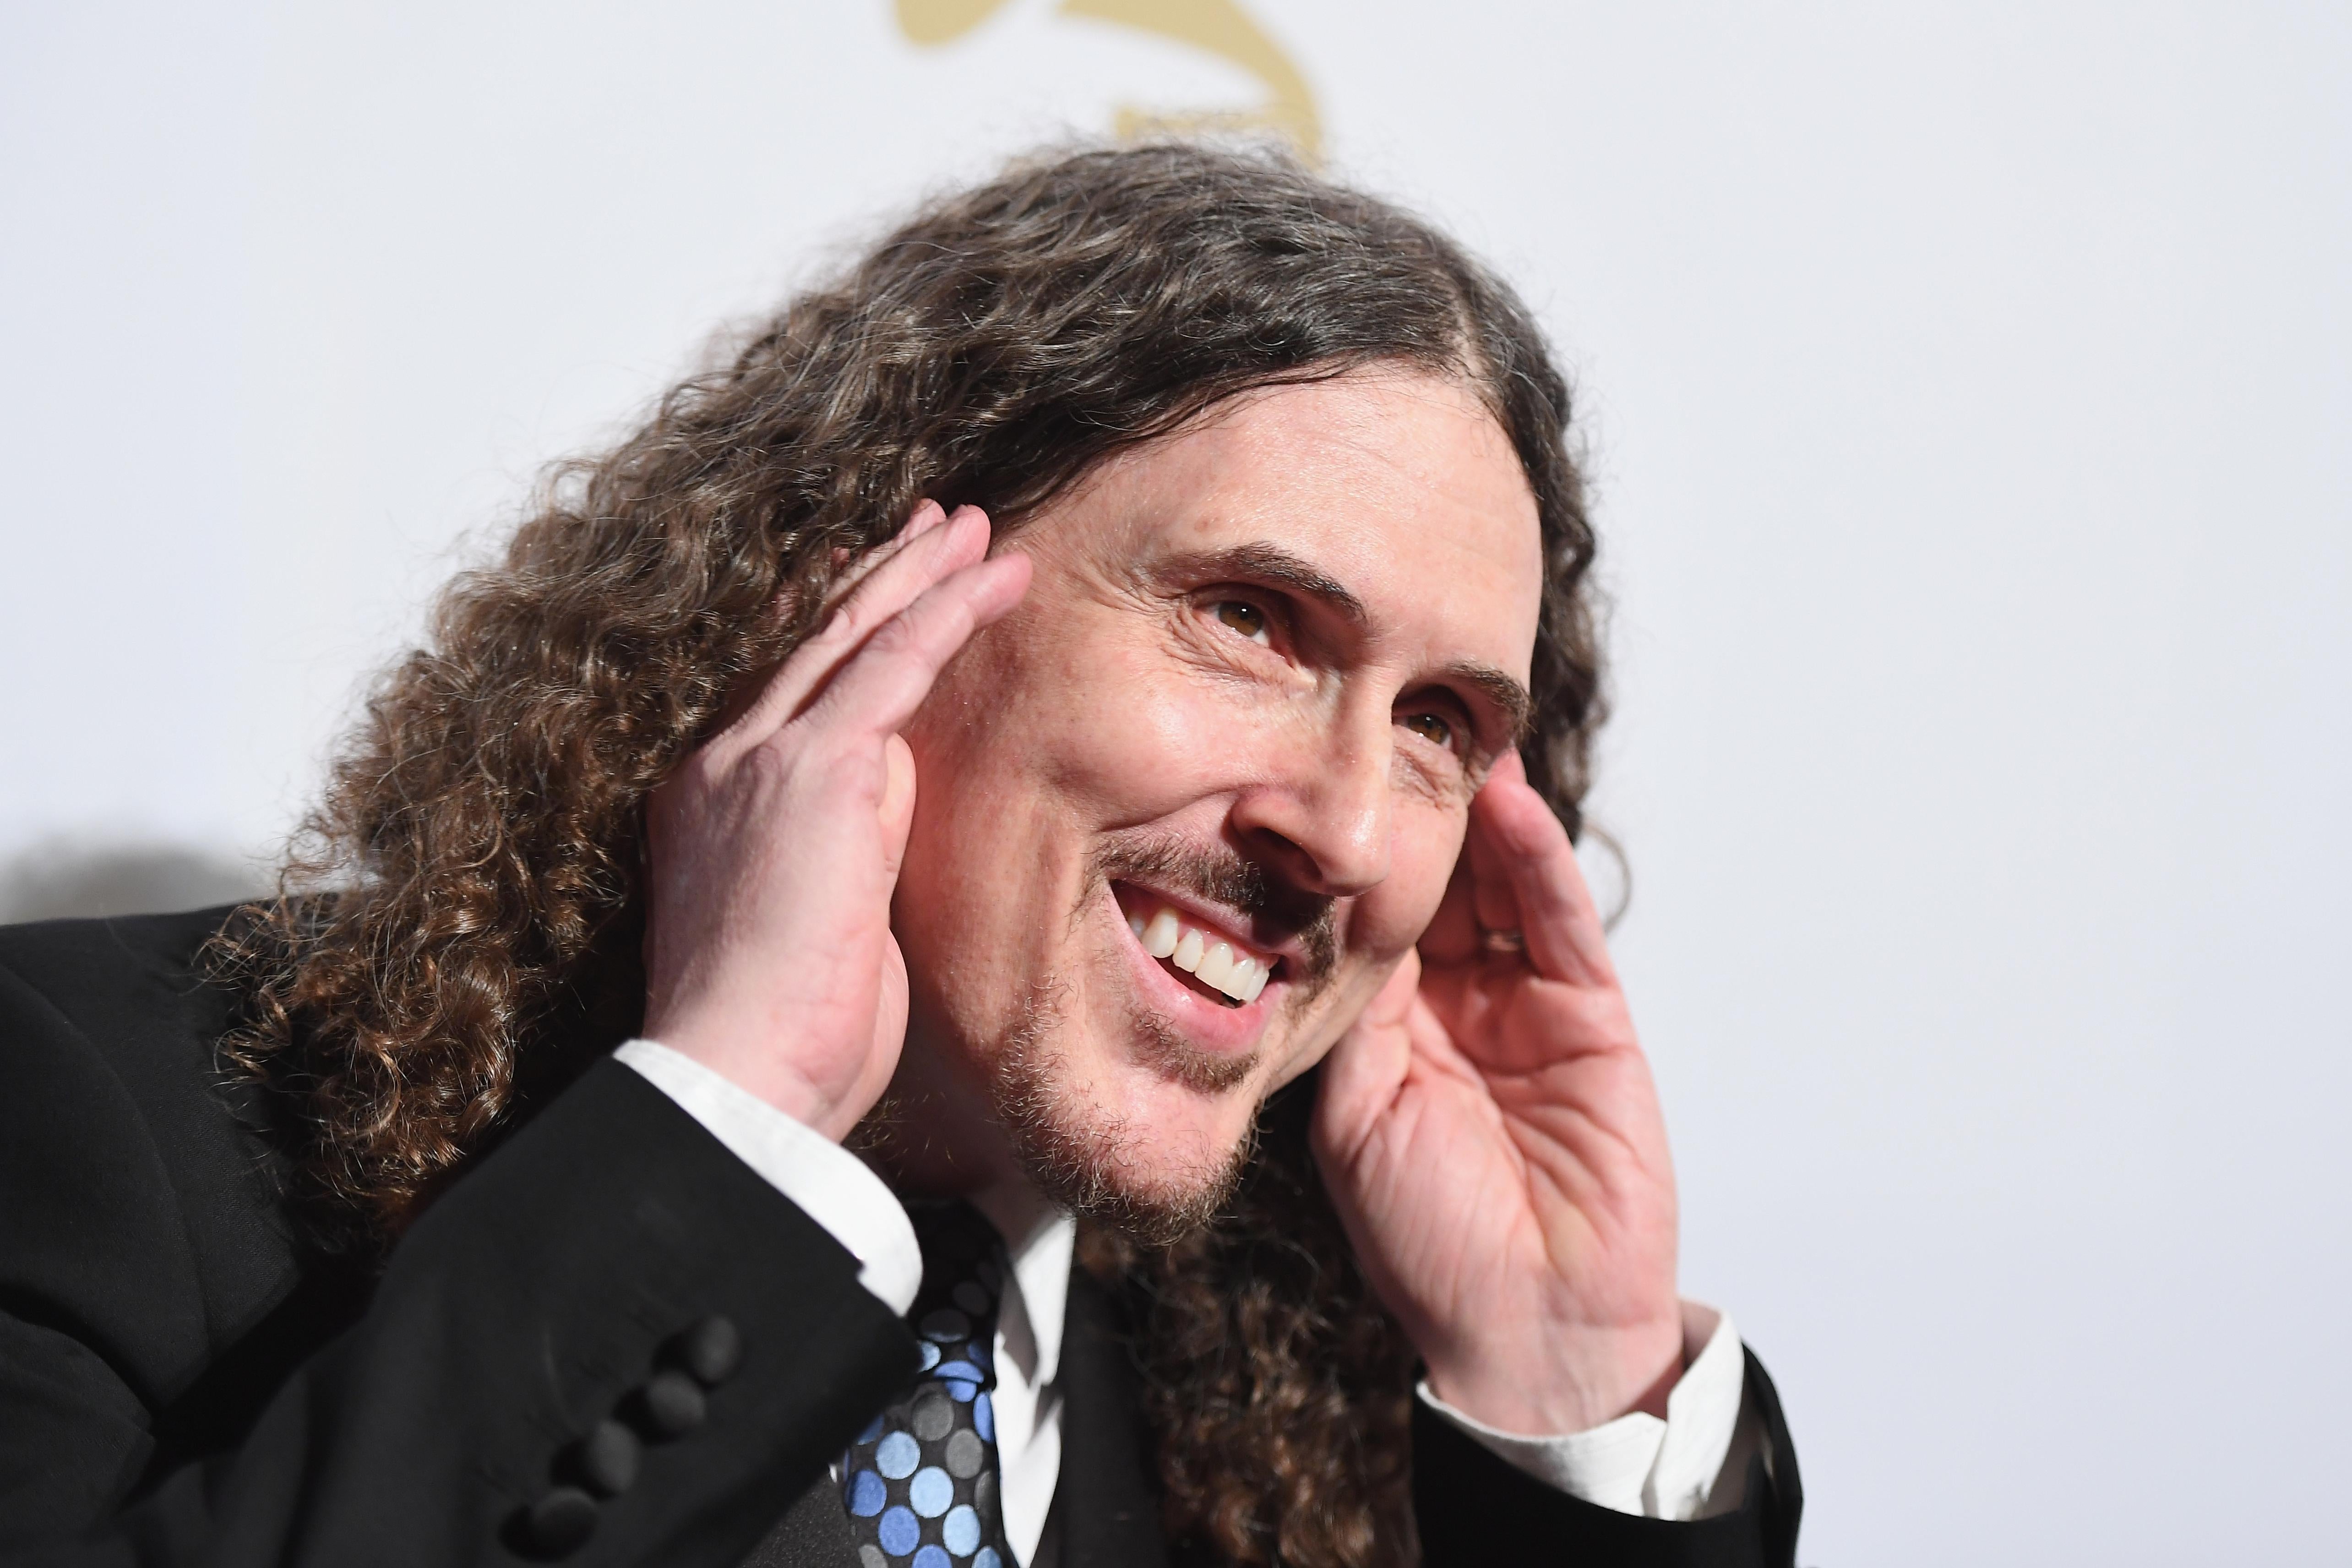 LOS ANGELES, CA - FEBRUARY 11:  Recording artist 'Weird Al' Yankovic attends Pre-GRAMMY Gala and Salute to Industry Icons Honoring Debra Lee at  The Beverly Hilton on February 11, 2017 in Los Angeles, California.  (Photo by Kevork Djansezian/Getty Images)